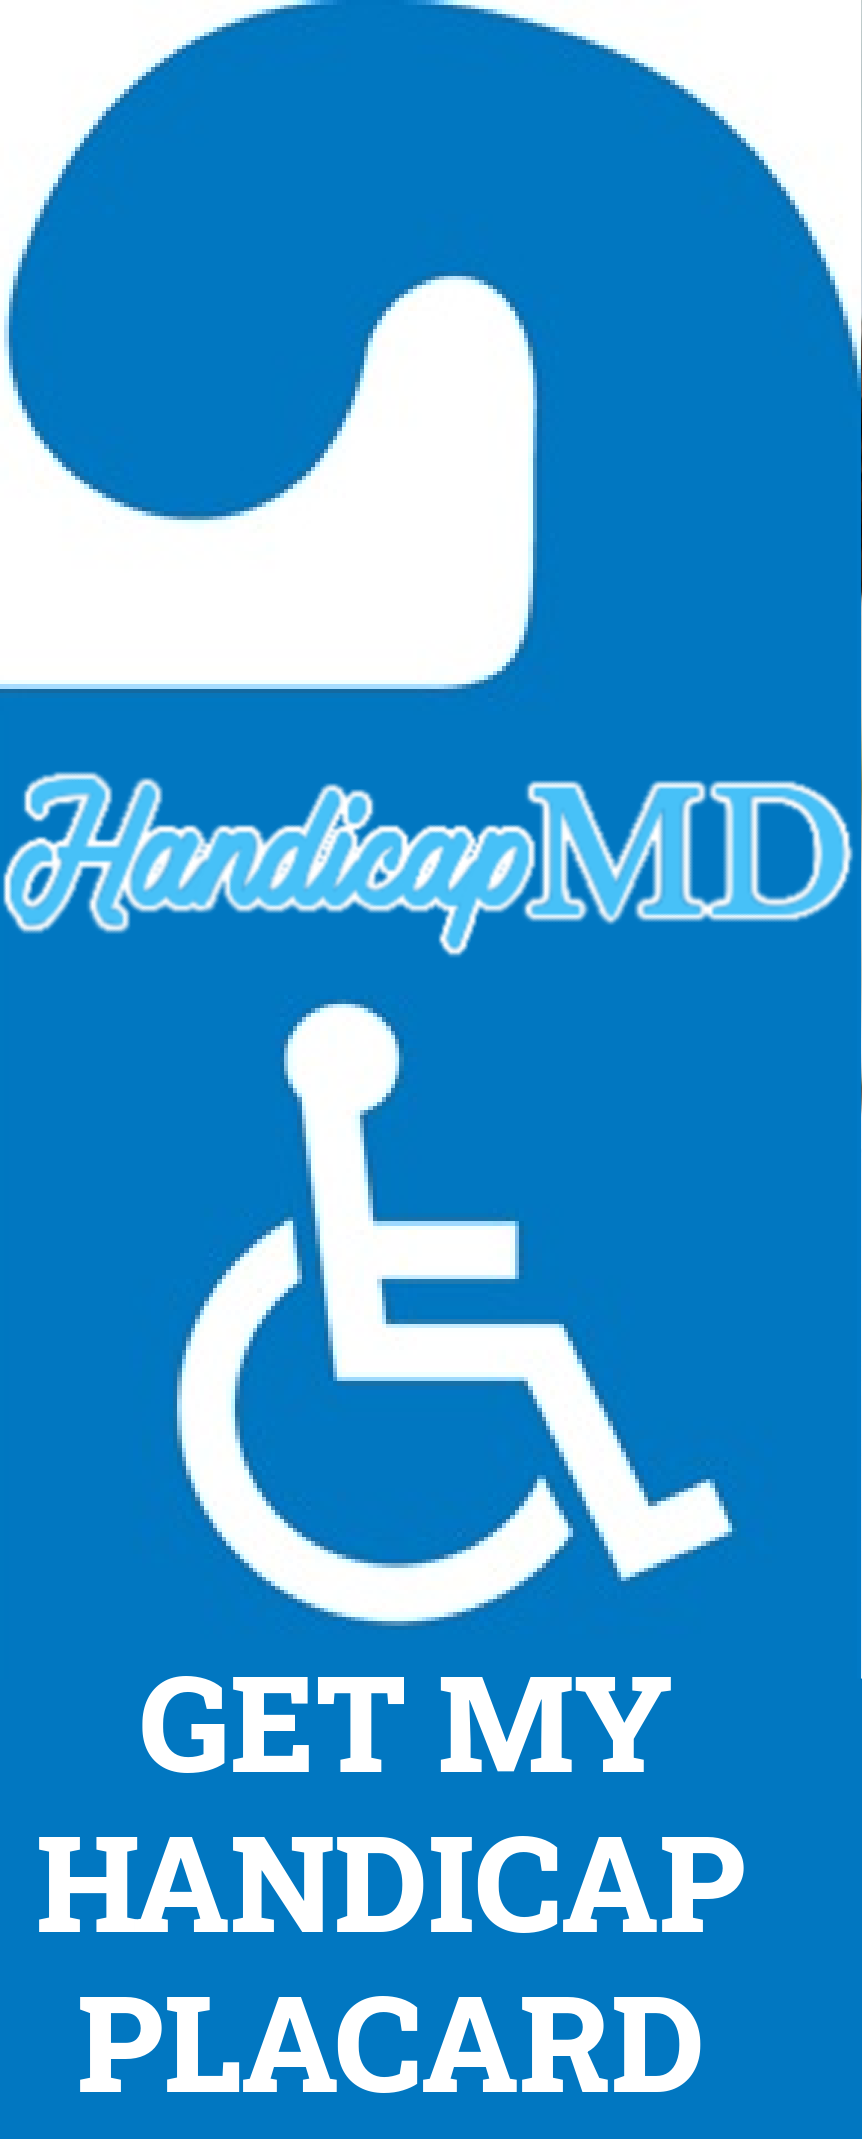 How To Get A Handicap Parking Placard Renewal in Ohio